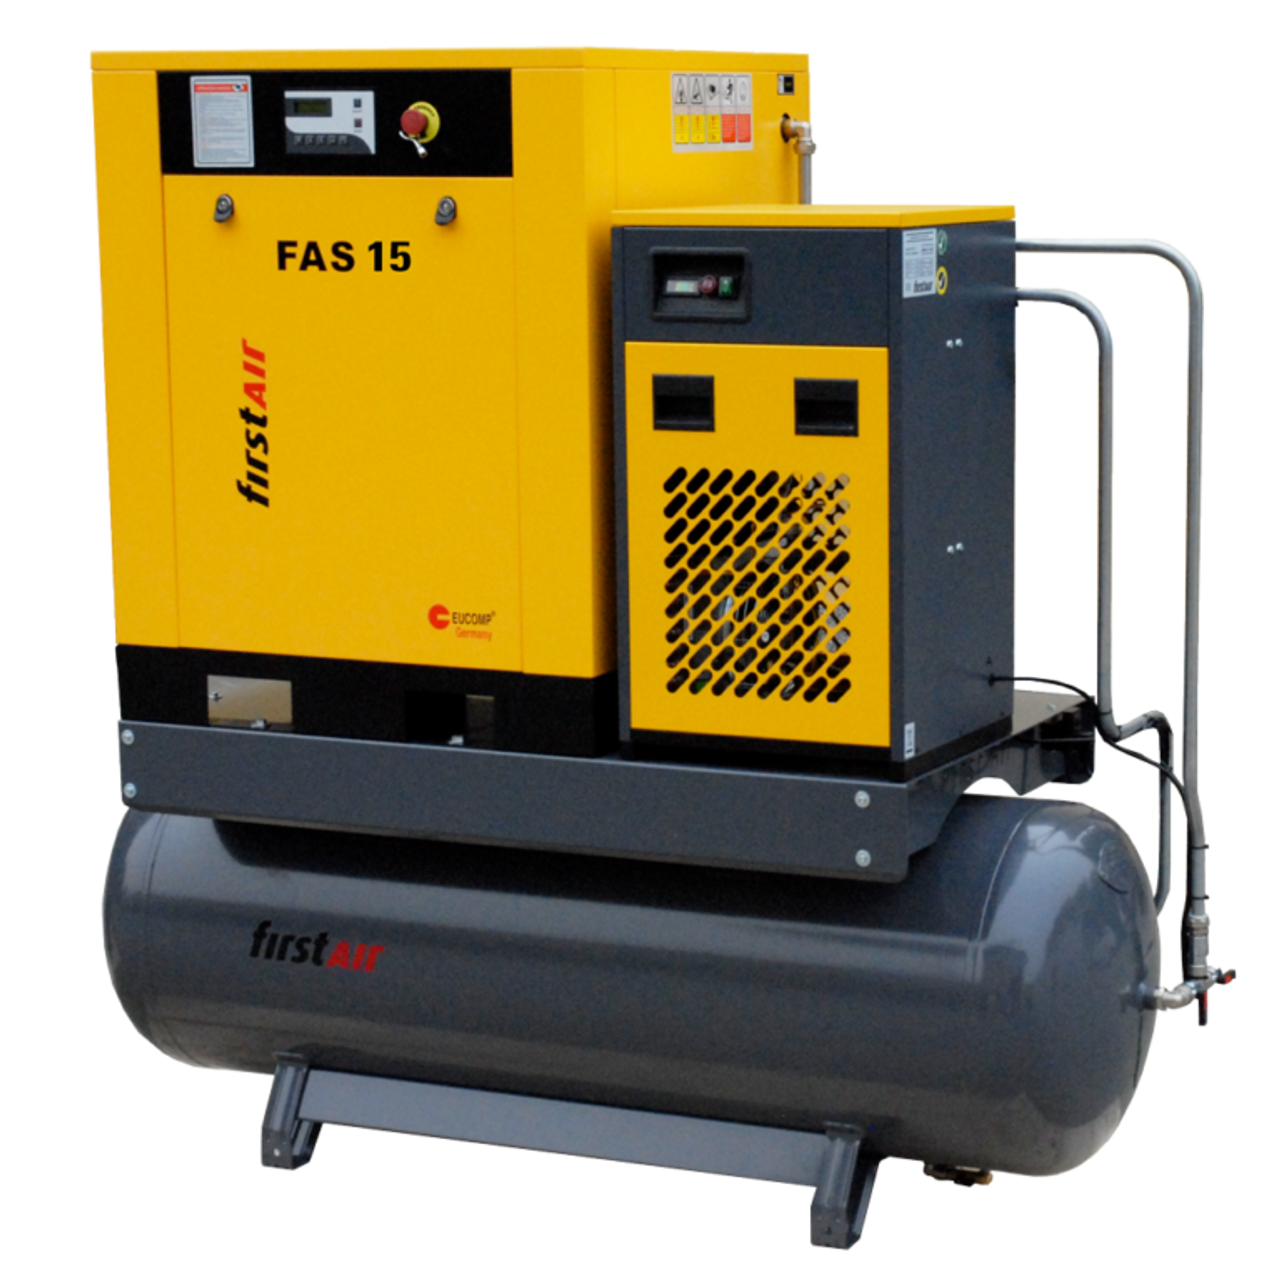 FirstAir FAS153U-460 20 HP 460 Volt Three Phase Tank Mount Rotary Screw Air Compressor with Dryer